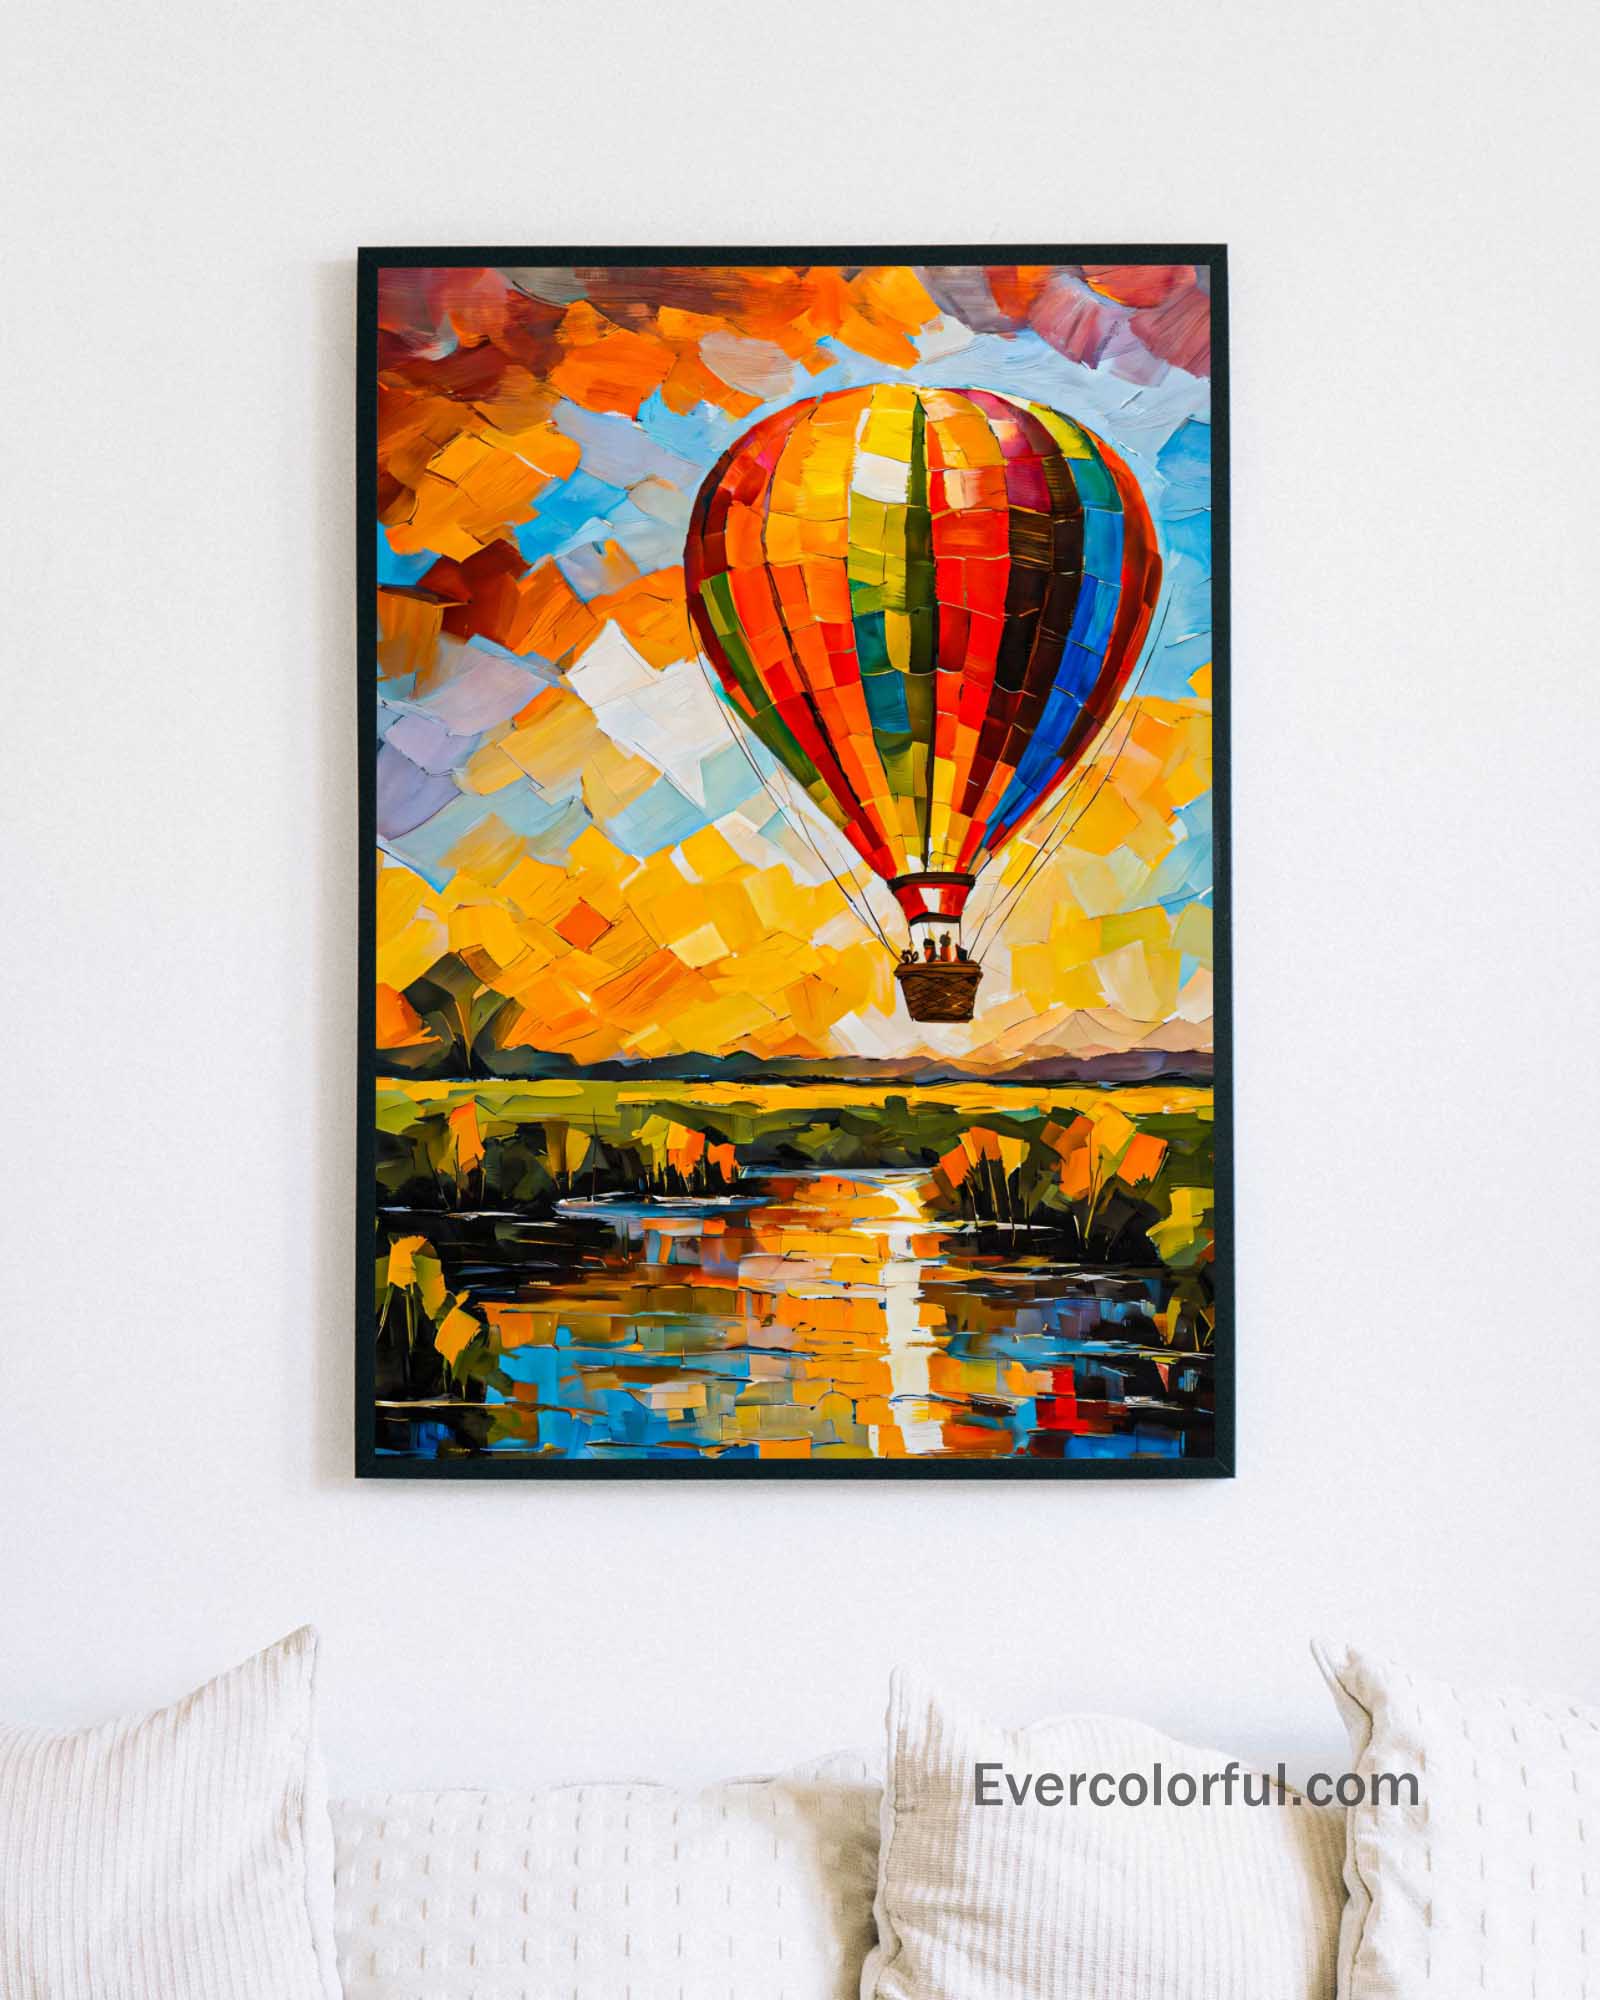 Aerial view - Poster - Ever colorful